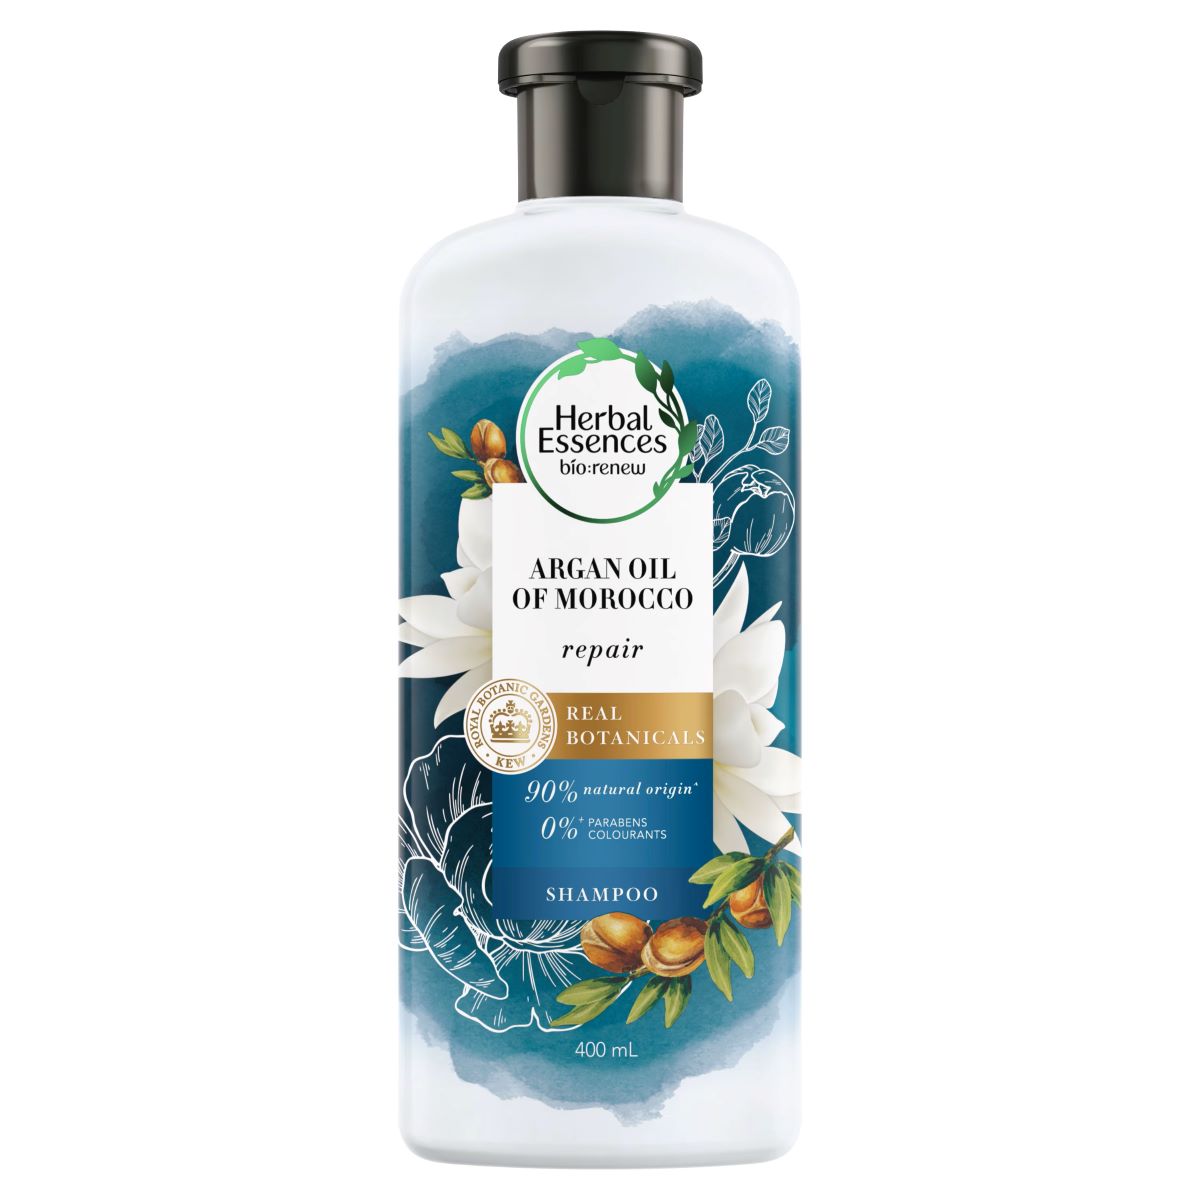 Discover The Incredible Benefits Of Herbal Essences Shampoos!